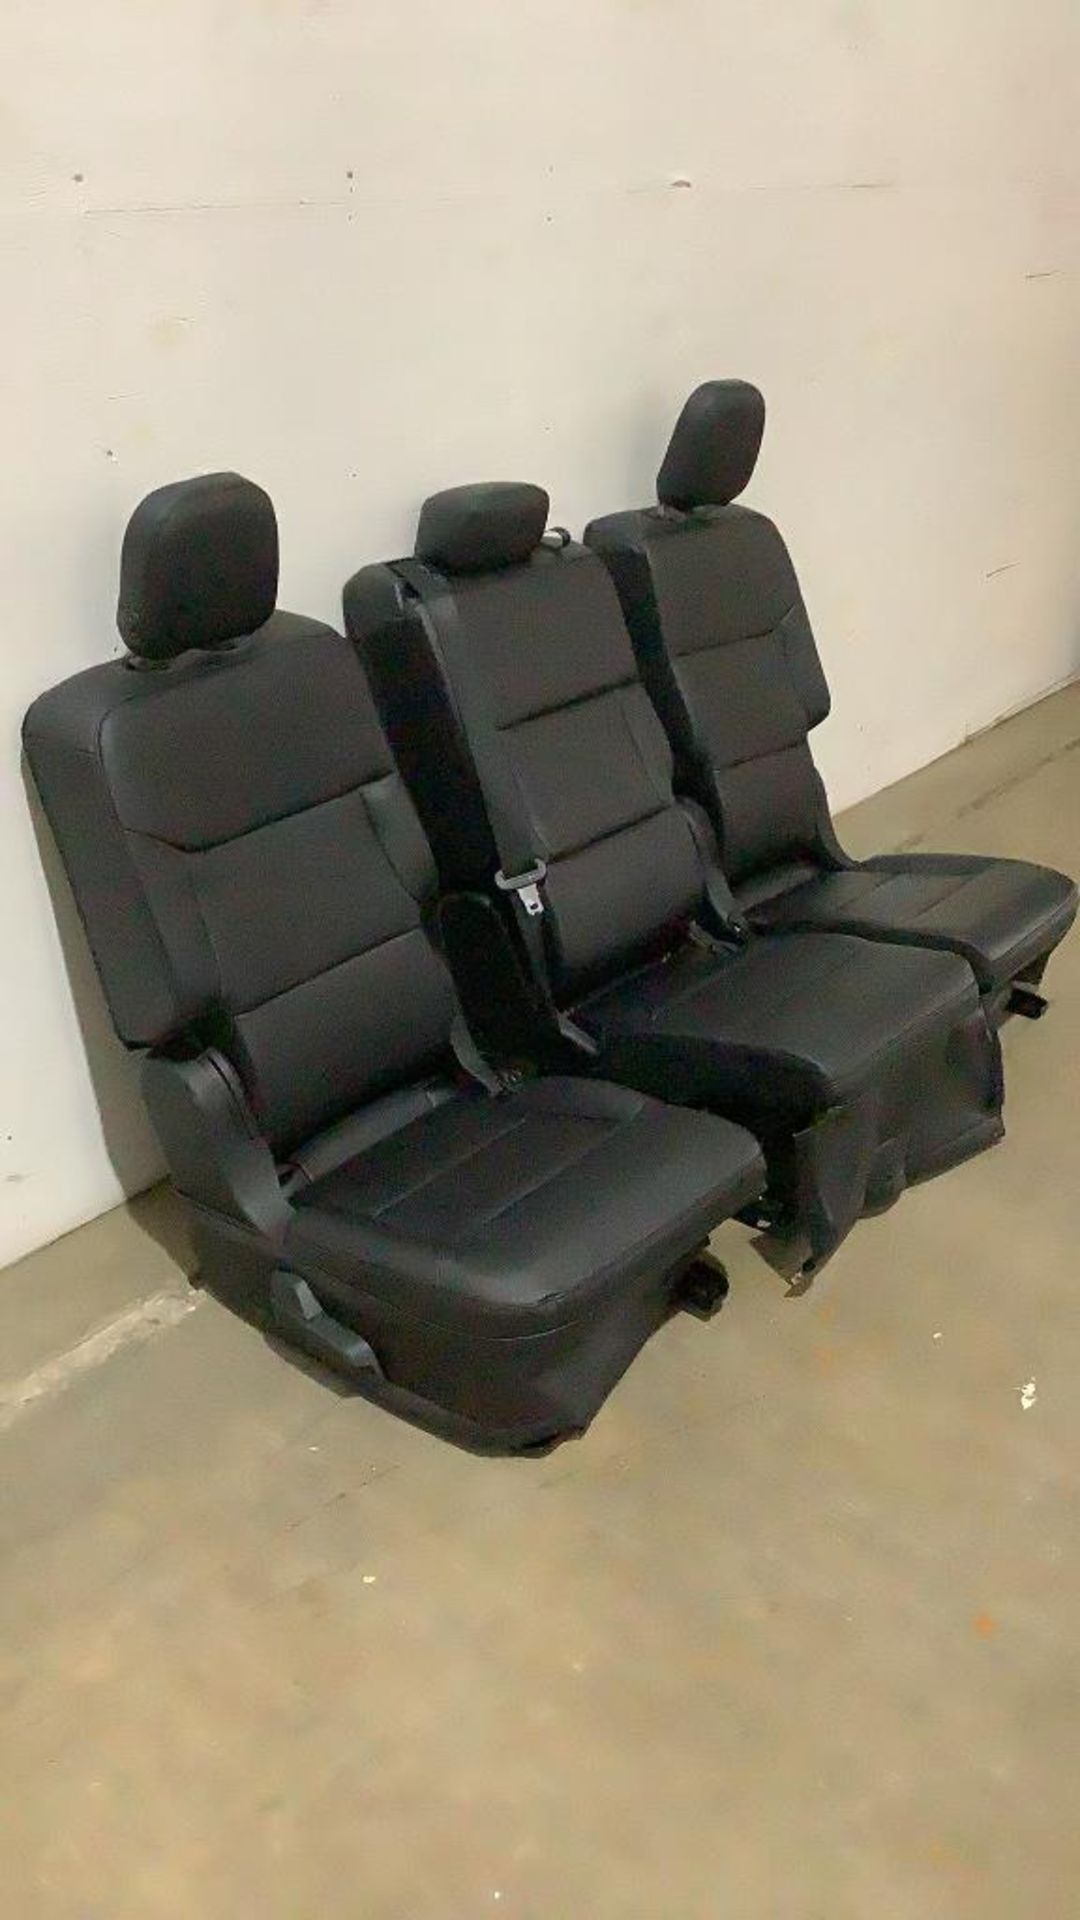 2020 Ford Explorer Set of Rear Seats - Image 7 of 12